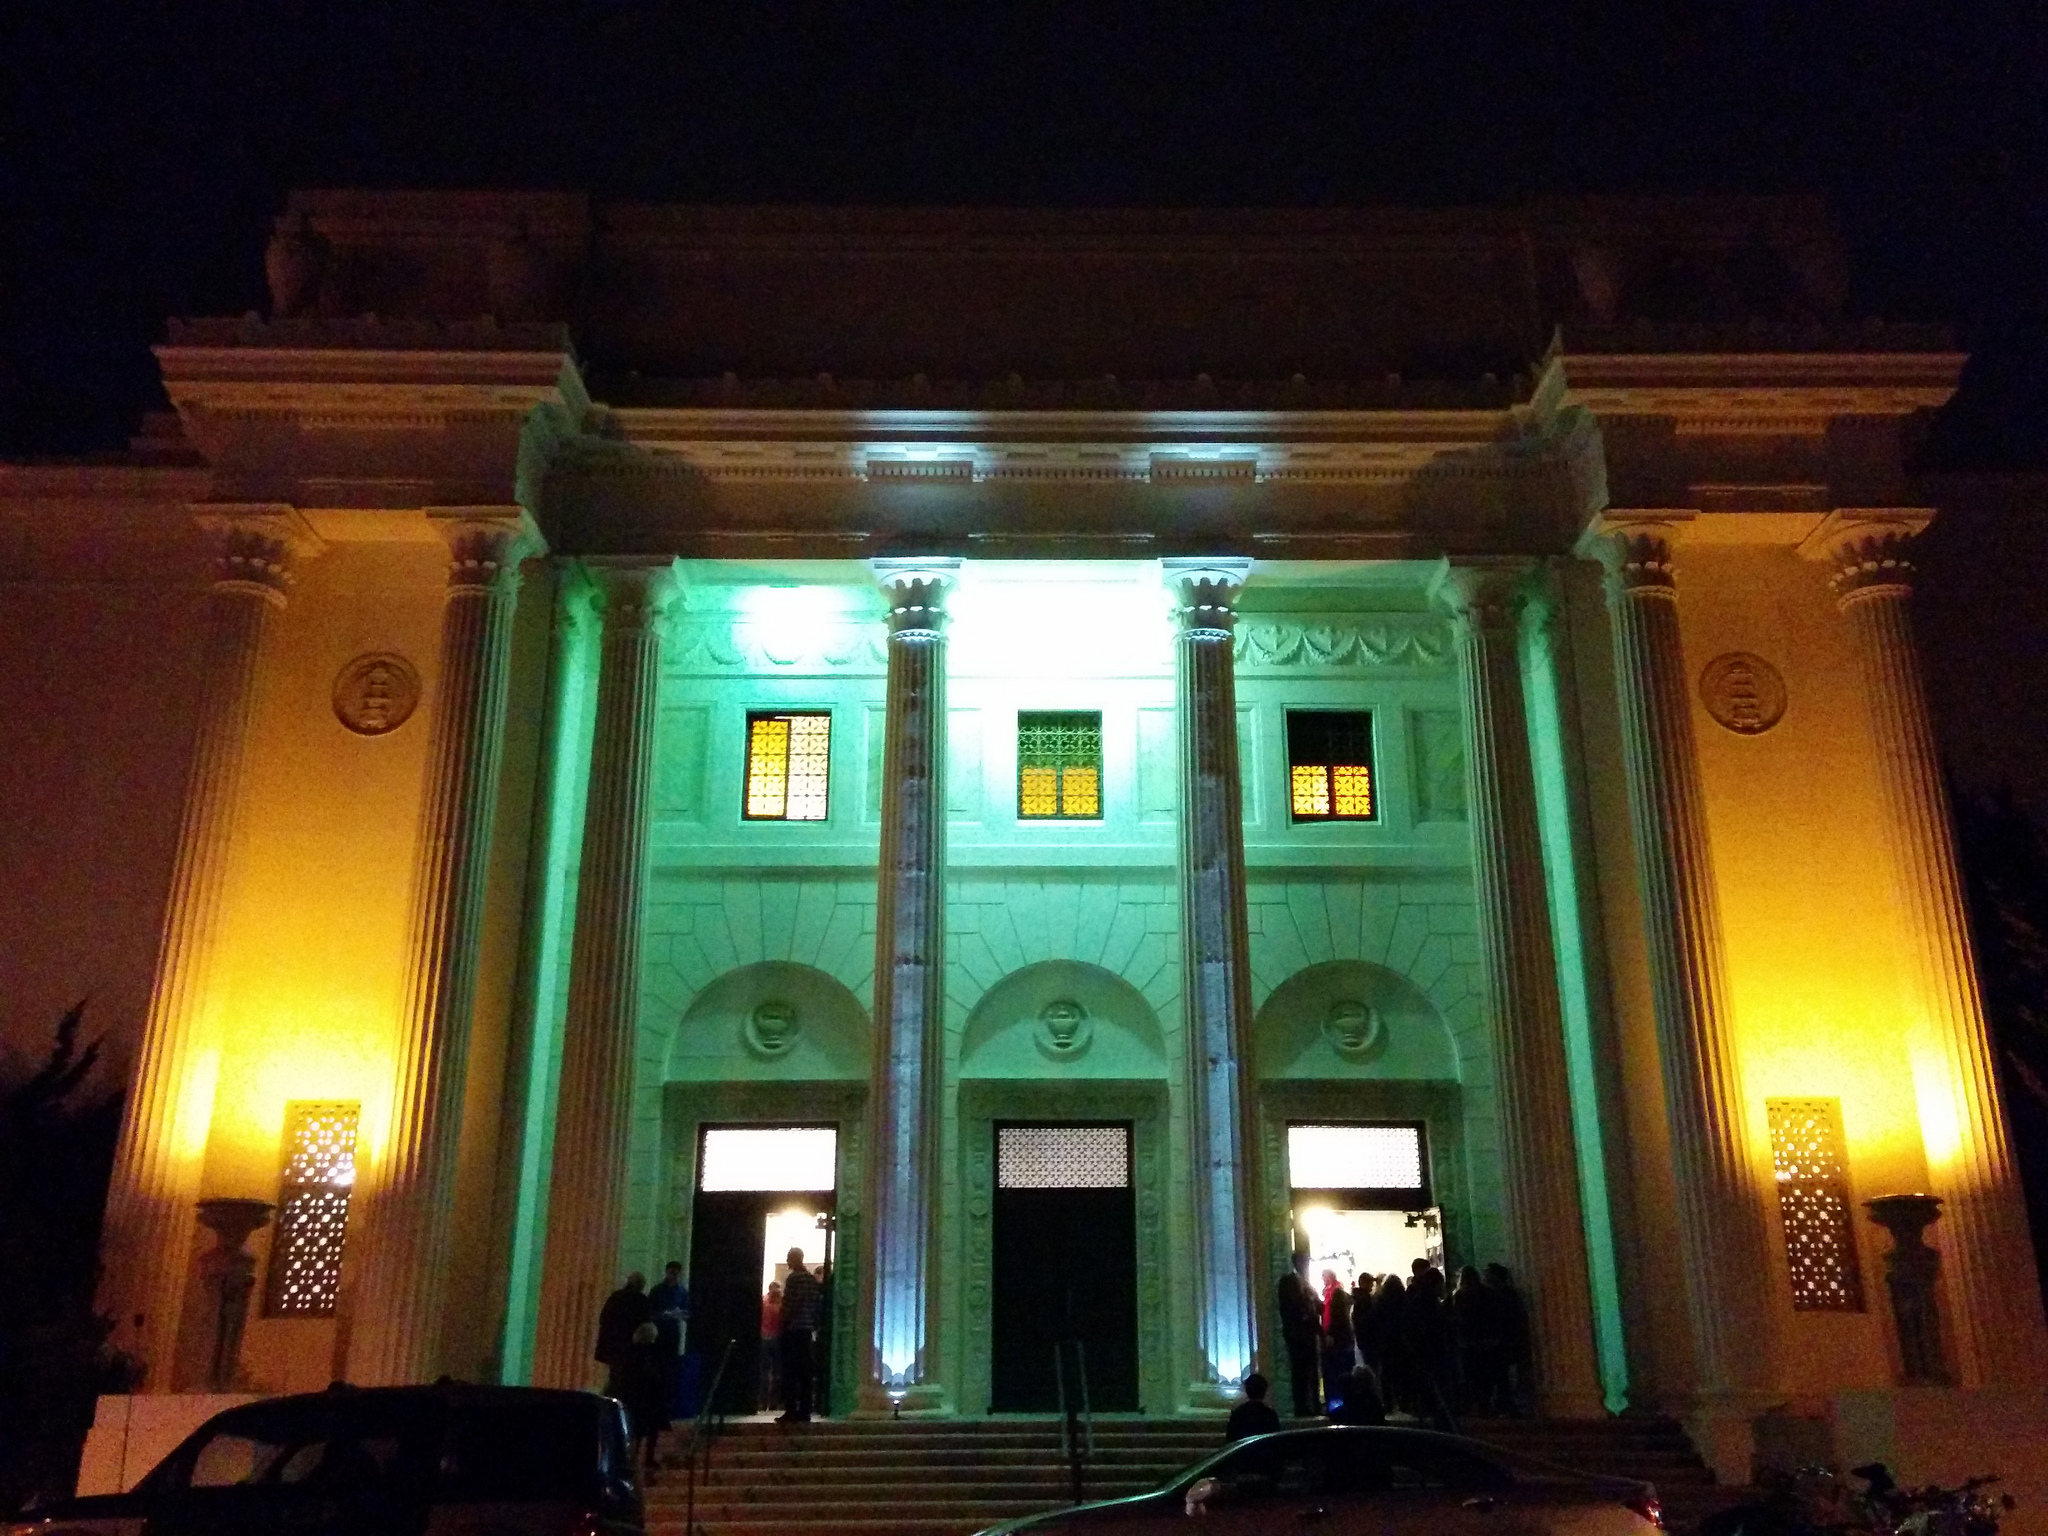 The Internet Archive at night